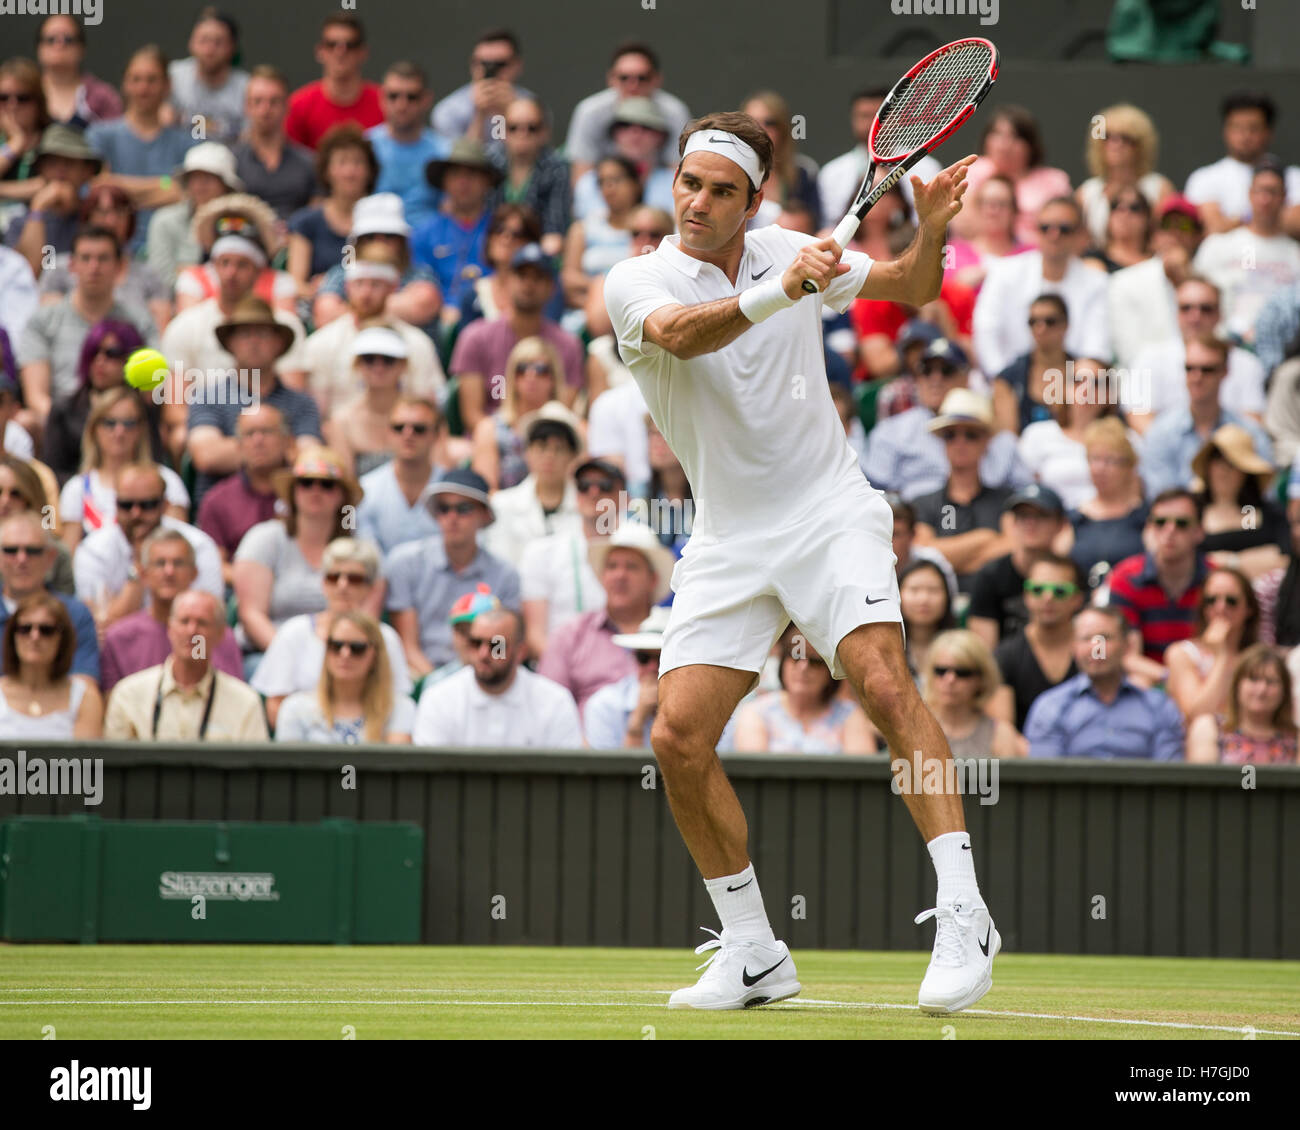 Roger Federer (SUI) in Aktion bei Wimbledon 2016 Stockfoto